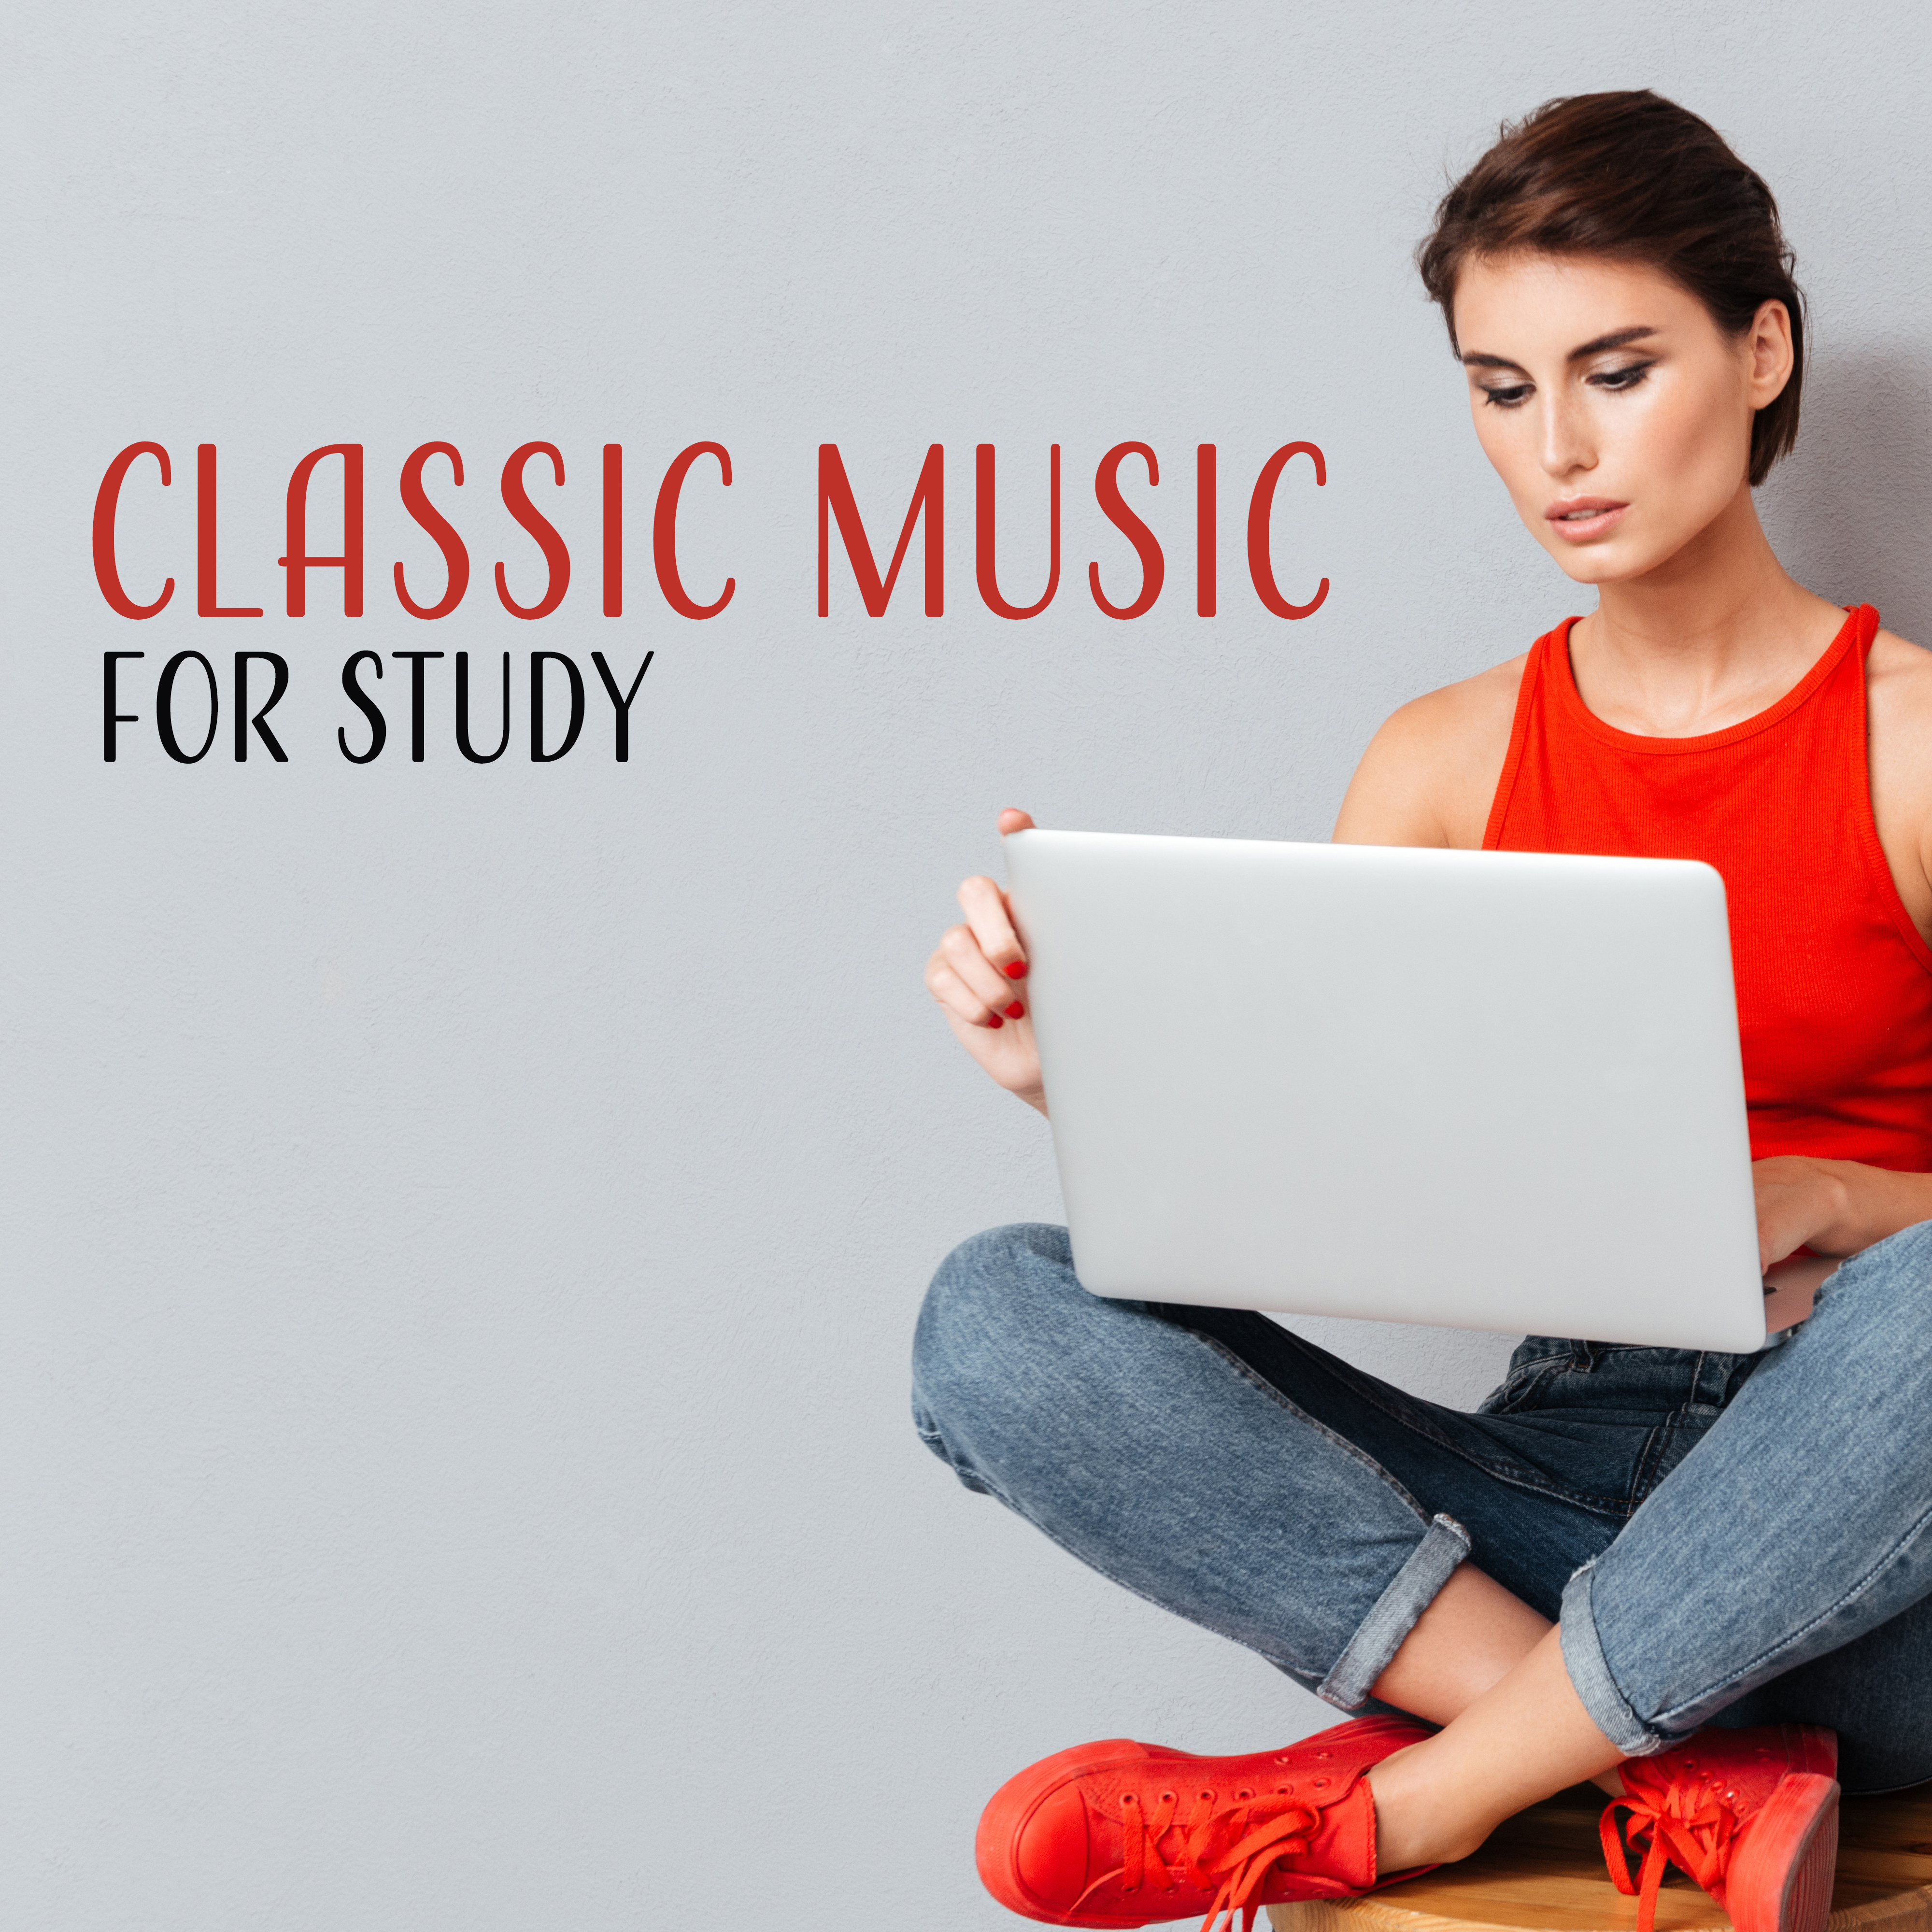 Classic Music for Study  Relaxing Music for Learning, Keep Focus  Study, Classical Artists Compilation